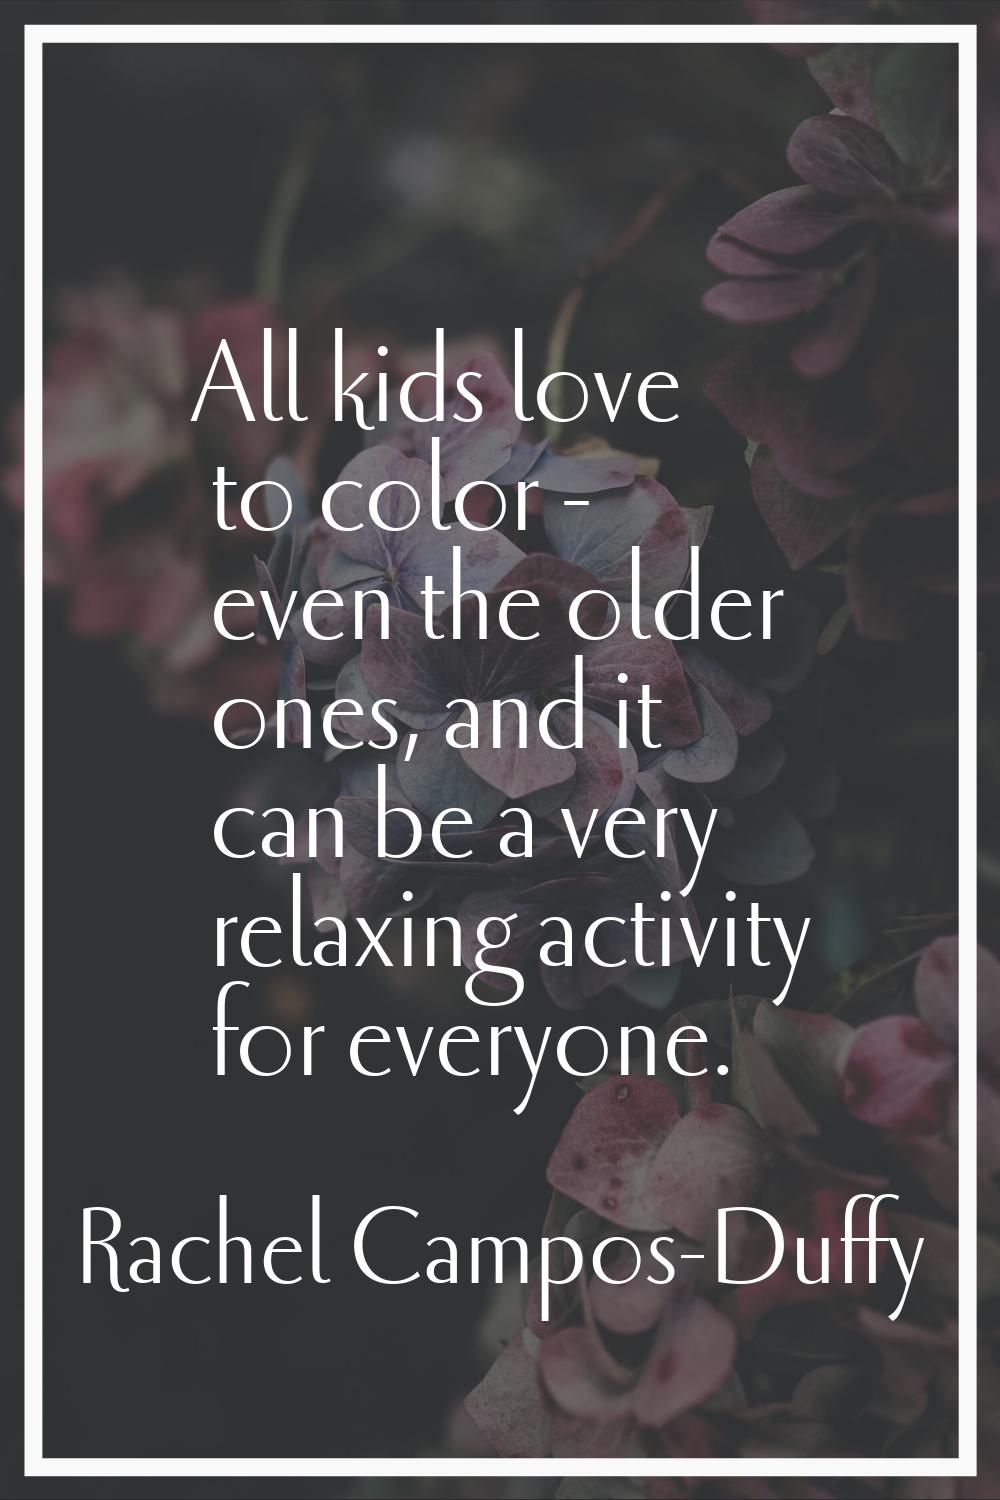 All kids love to color - even the older ones, and it can be a very relaxing activity for everyone.